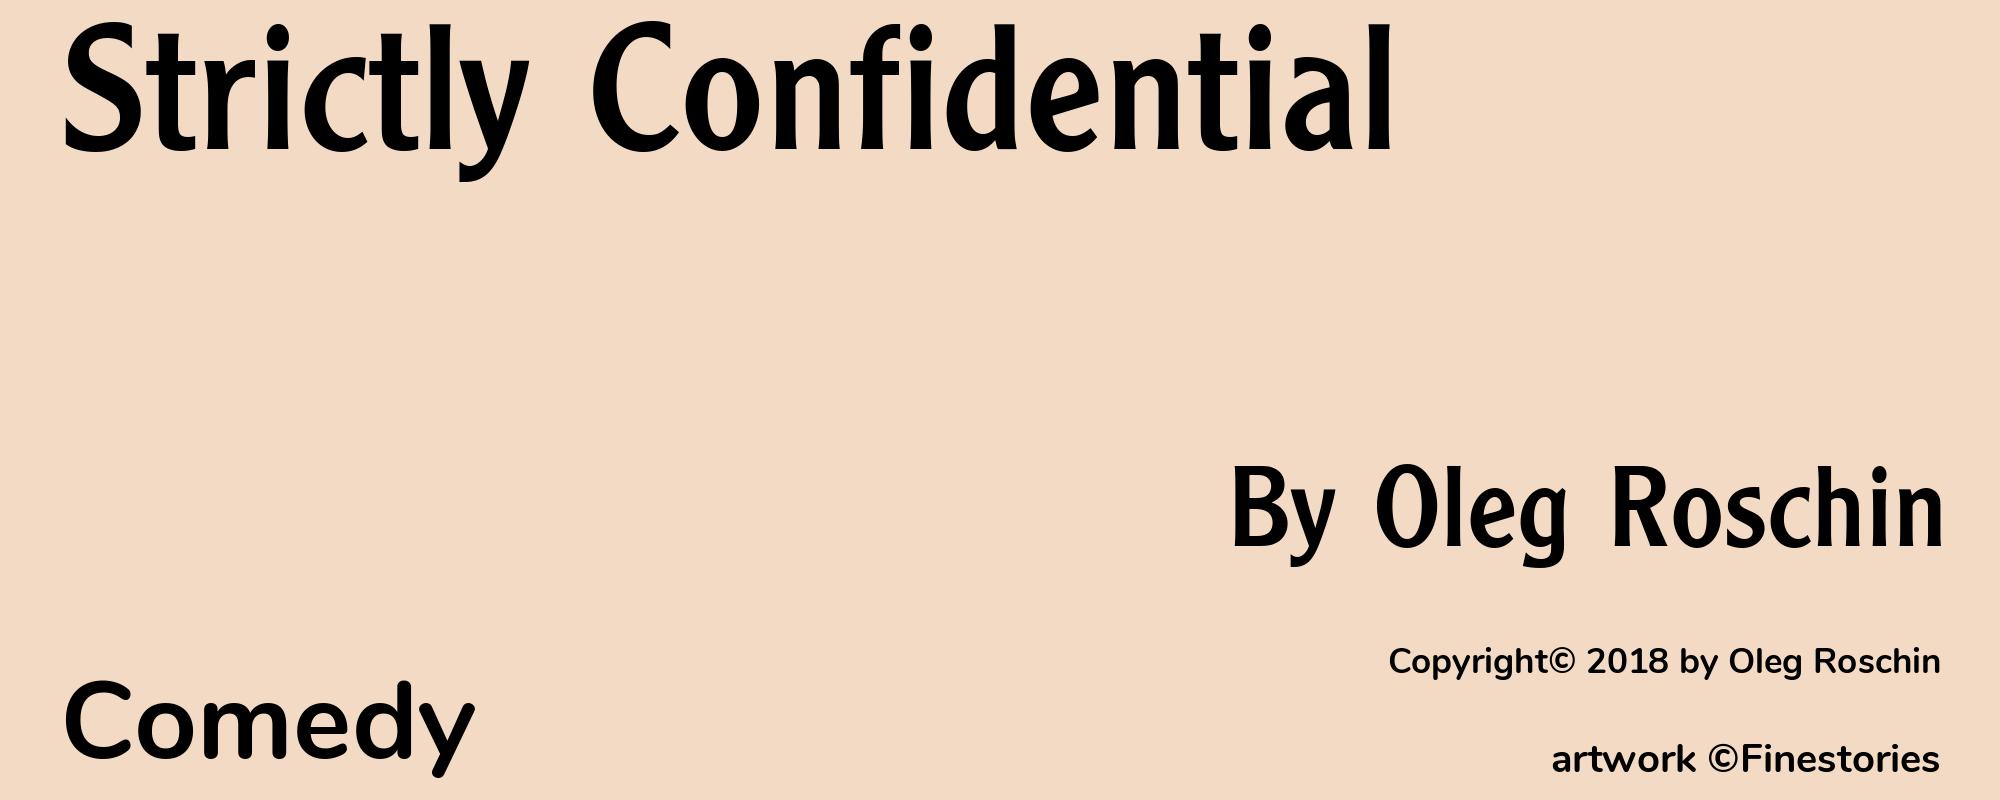 Strictly Confidential - Cover